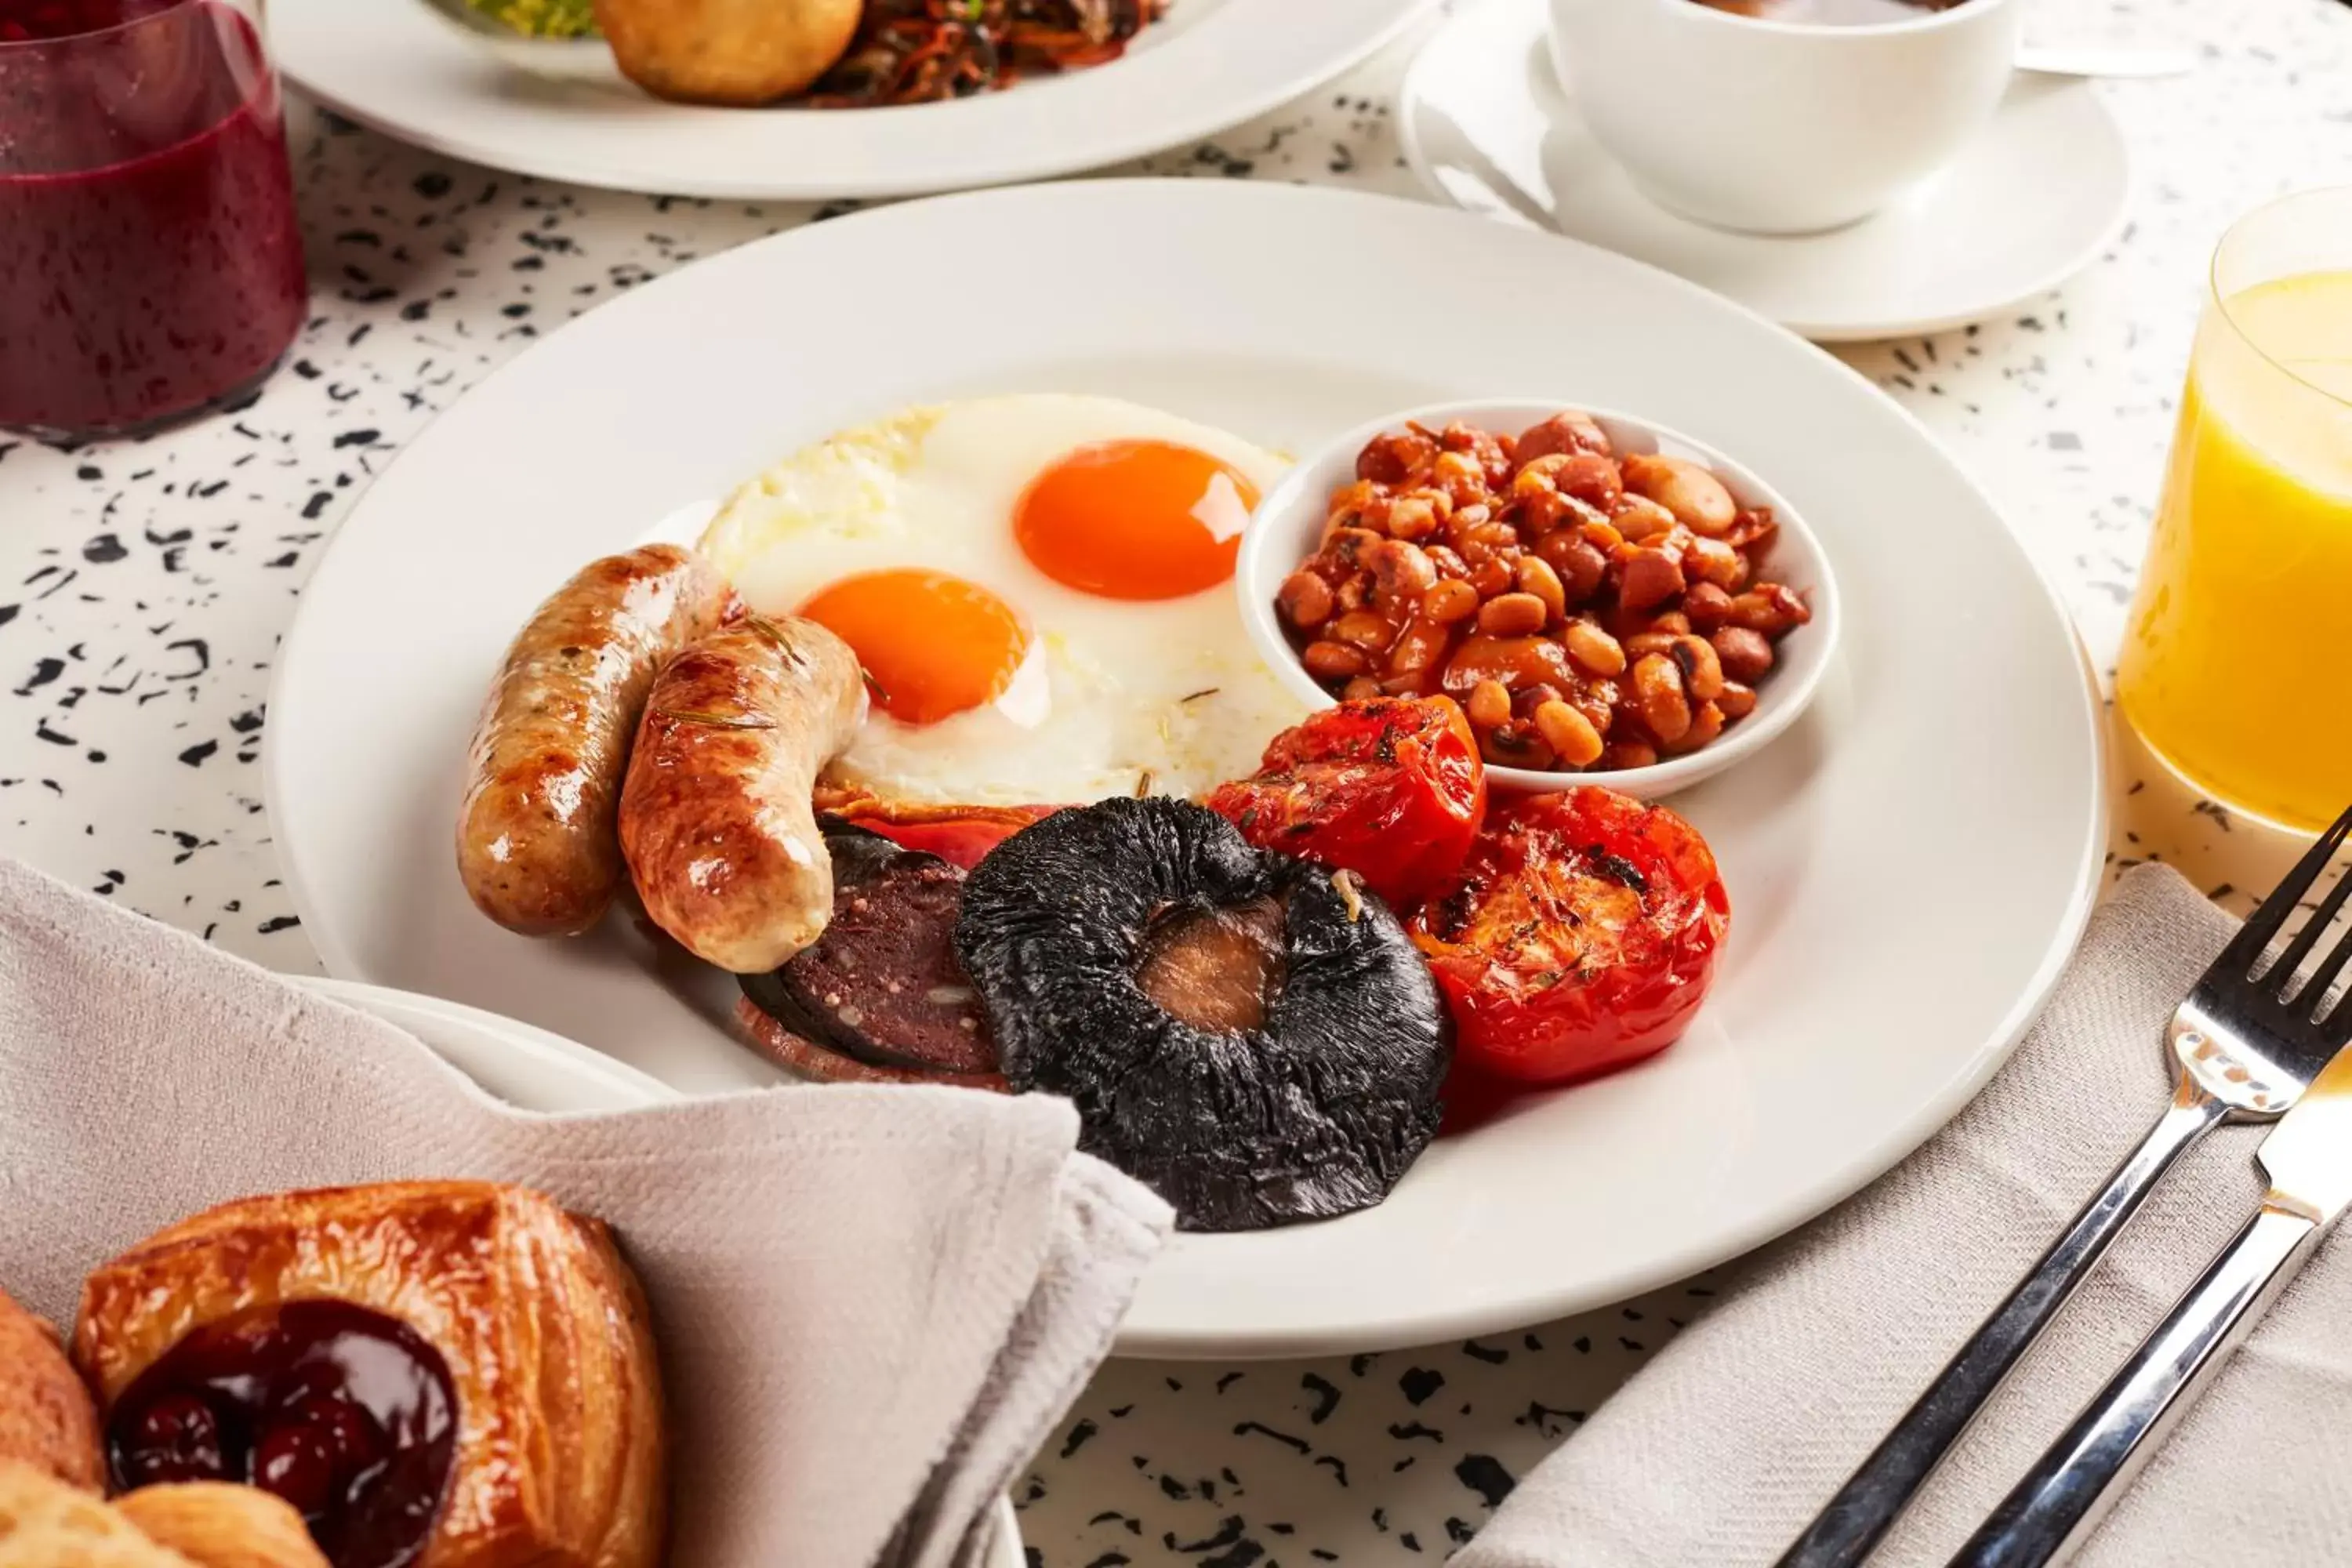 Breakfast in One Hundred Shoreditch